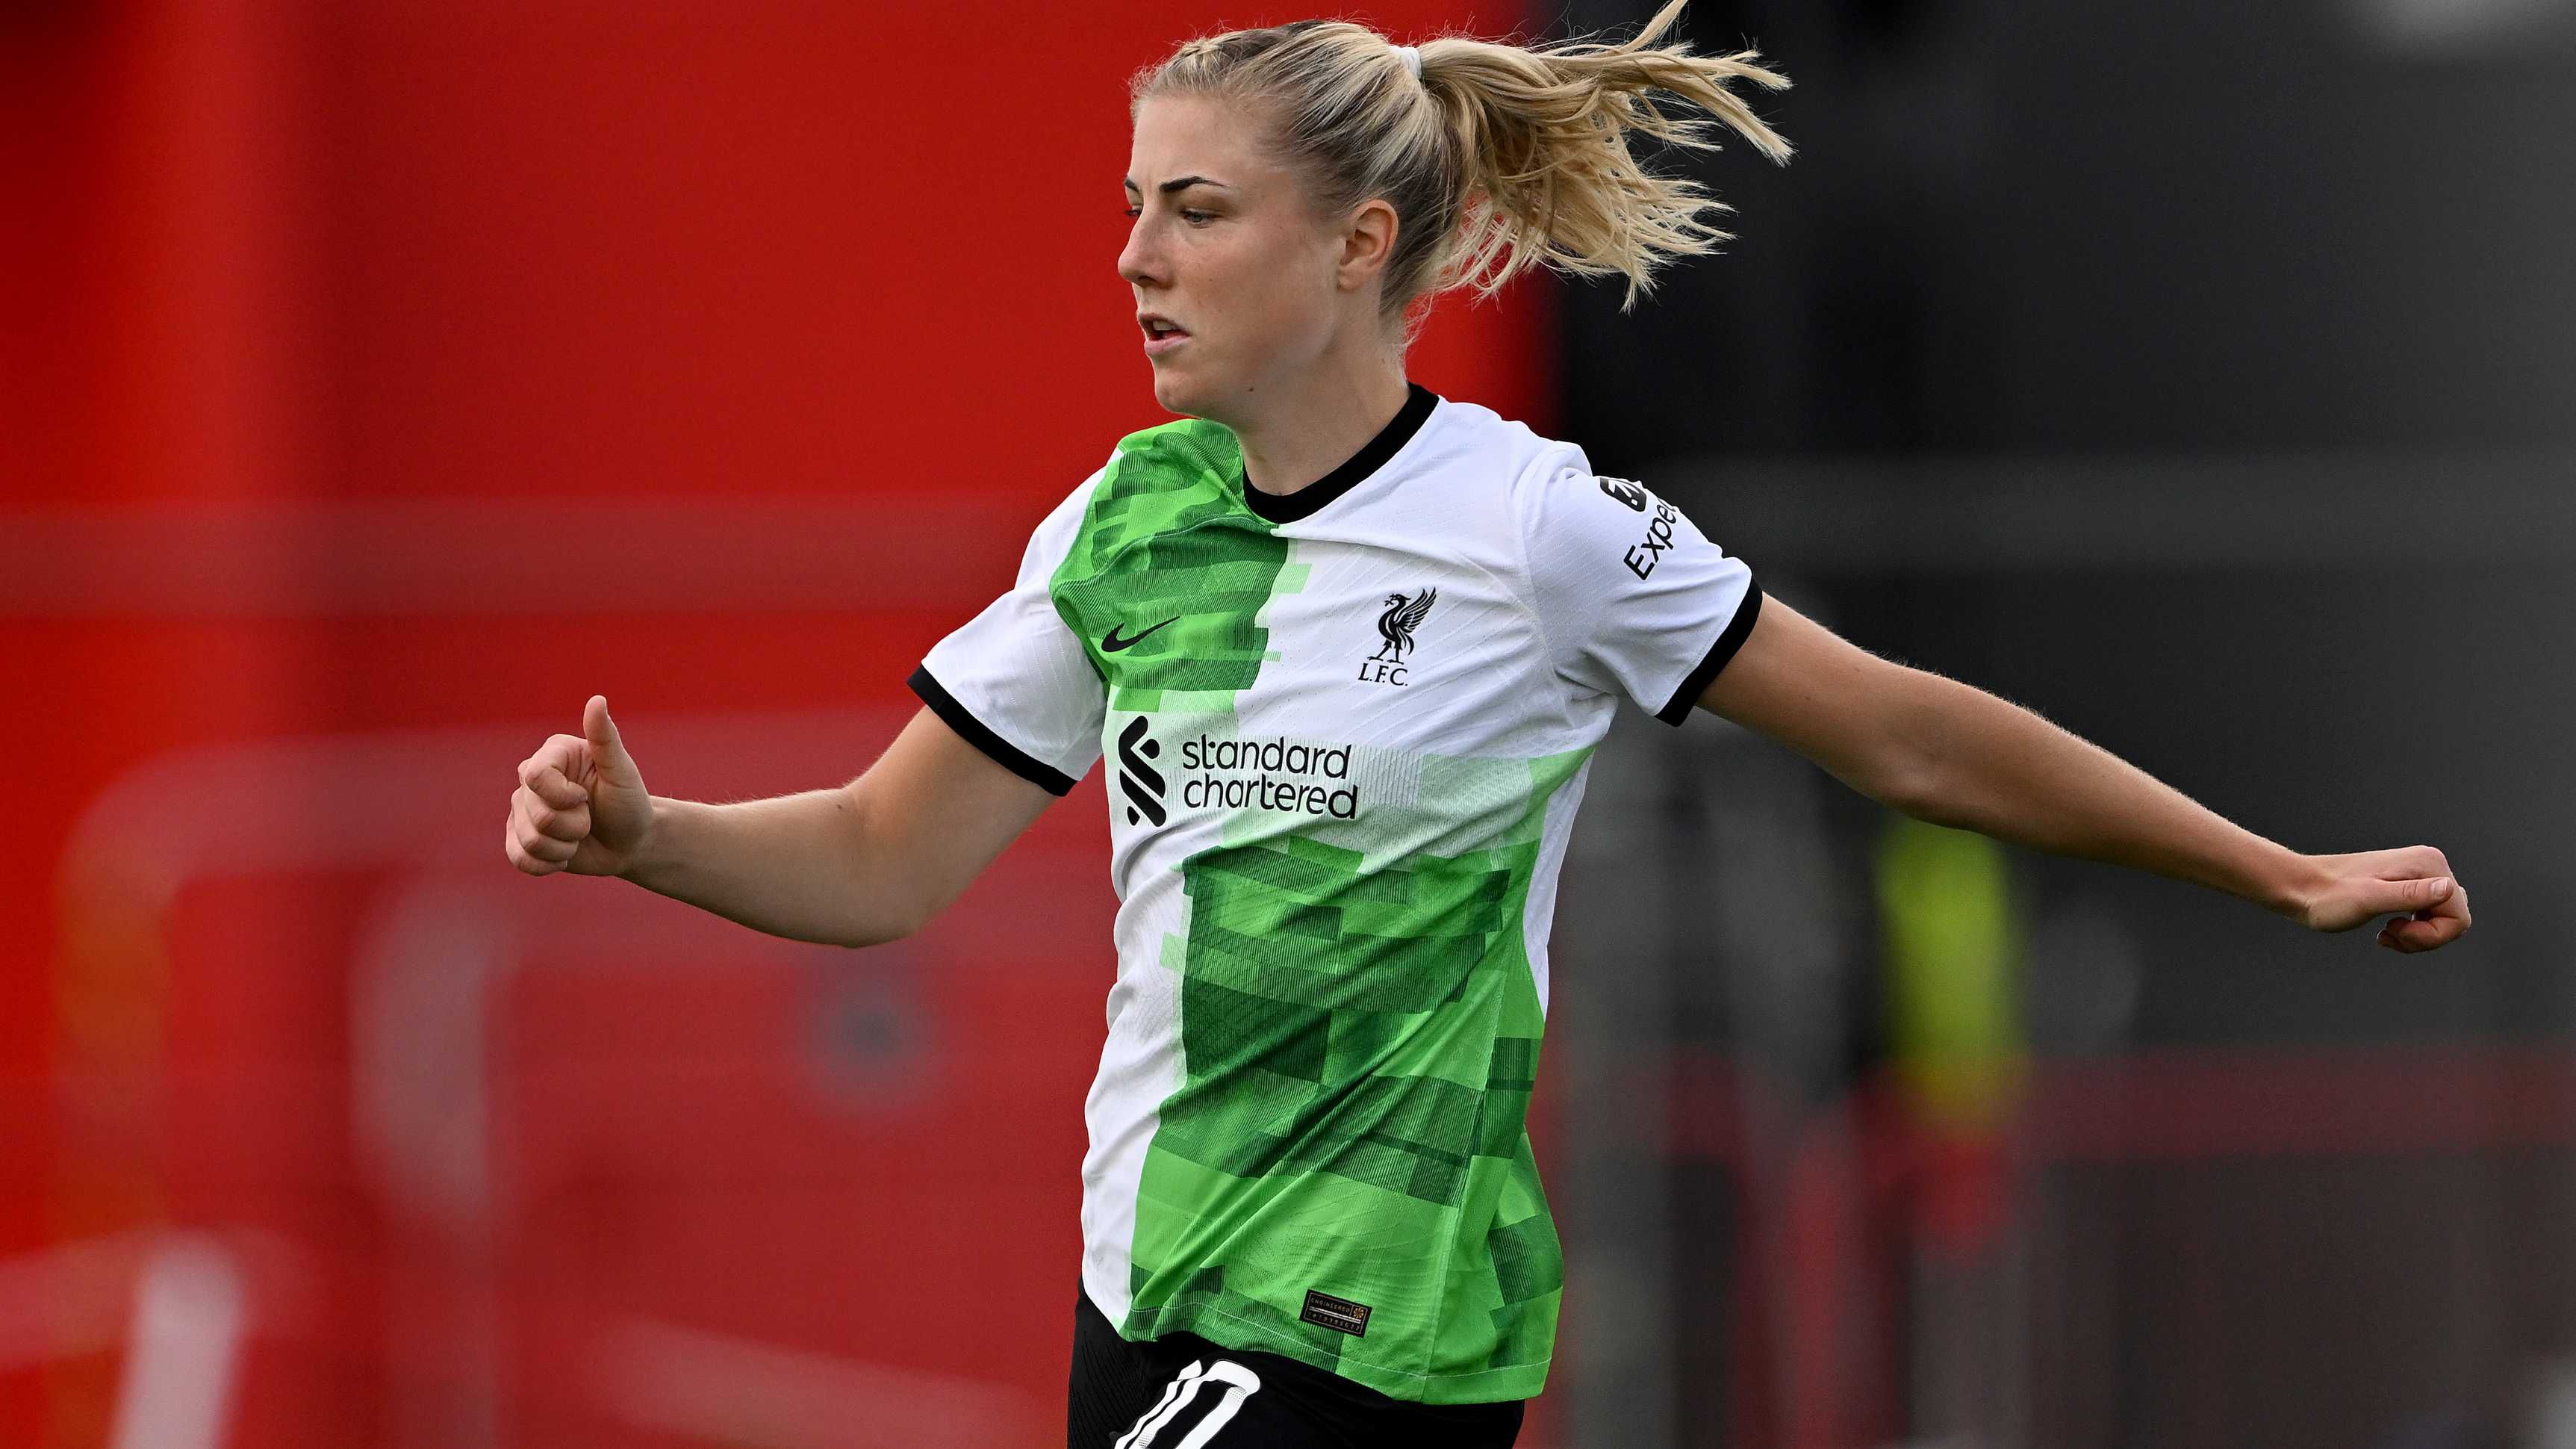 🚨TRANSFER NEWS🚨 Liverpool announce the signing of Sophie Roman Haug😉  Thoughts on the signing?🔥